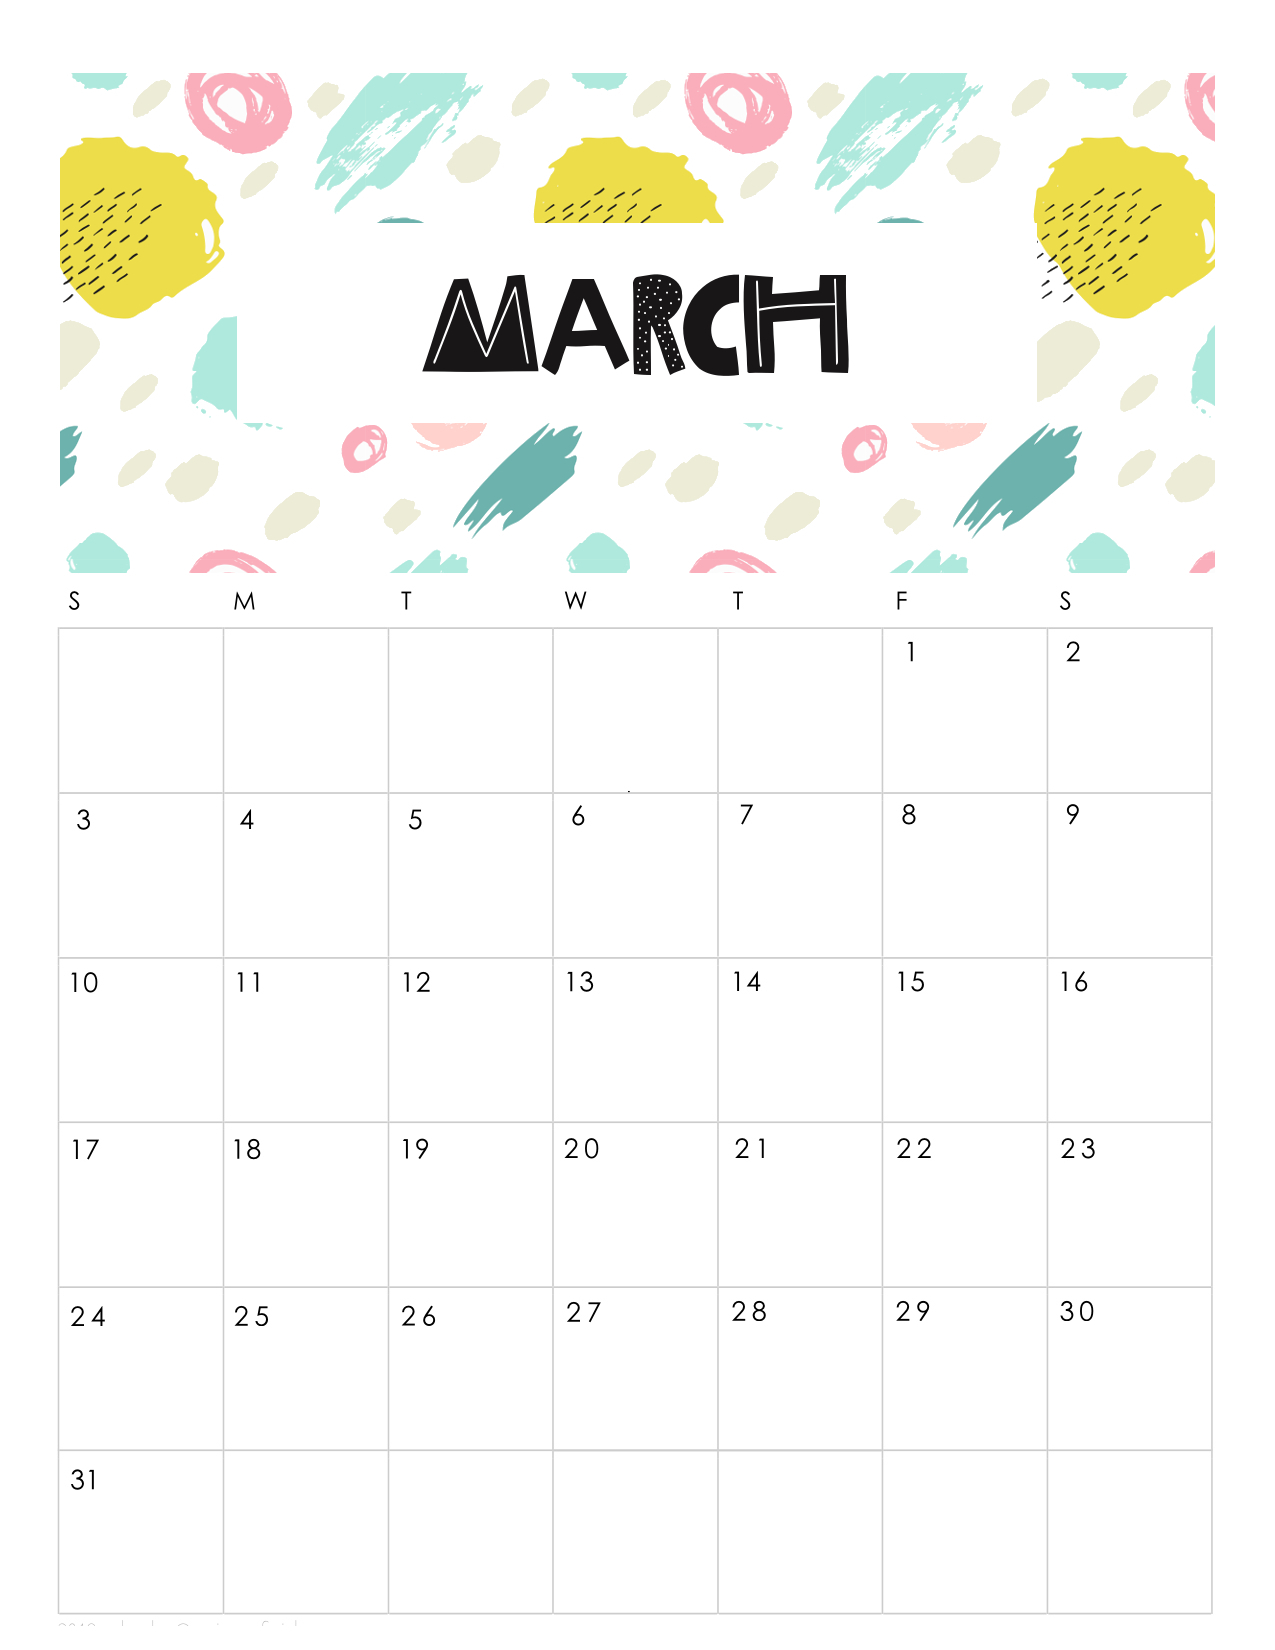 free-printable-abstract-patterned-calendar-2019-march.jpg